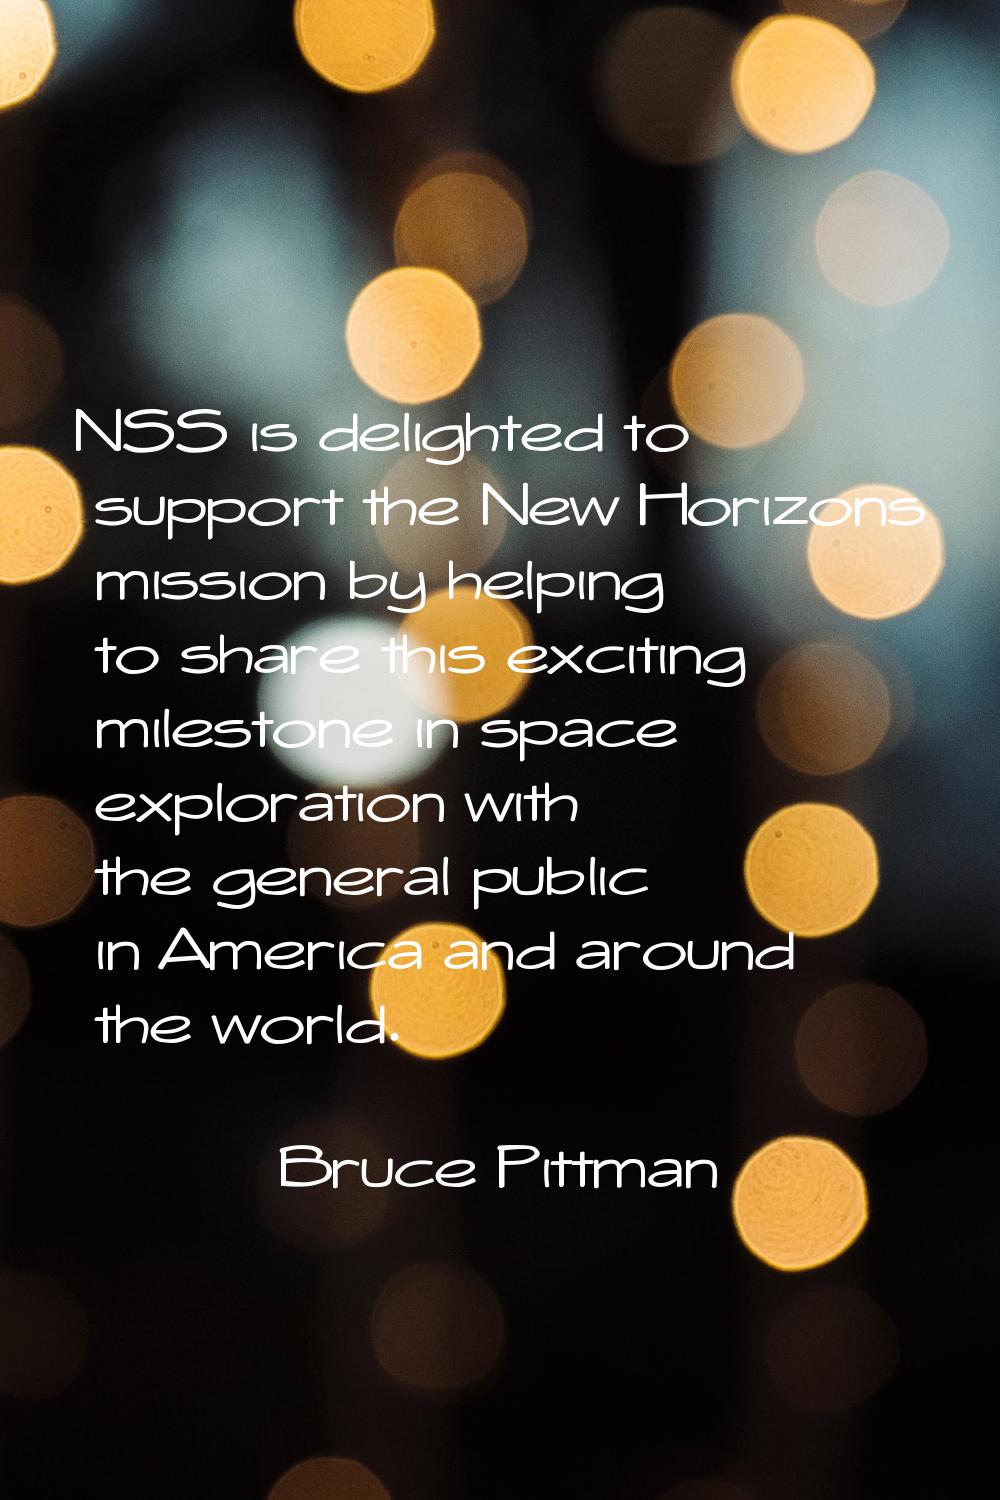 NSS is delighted to support the New Horizons mission by helping to share this exciting milestone in